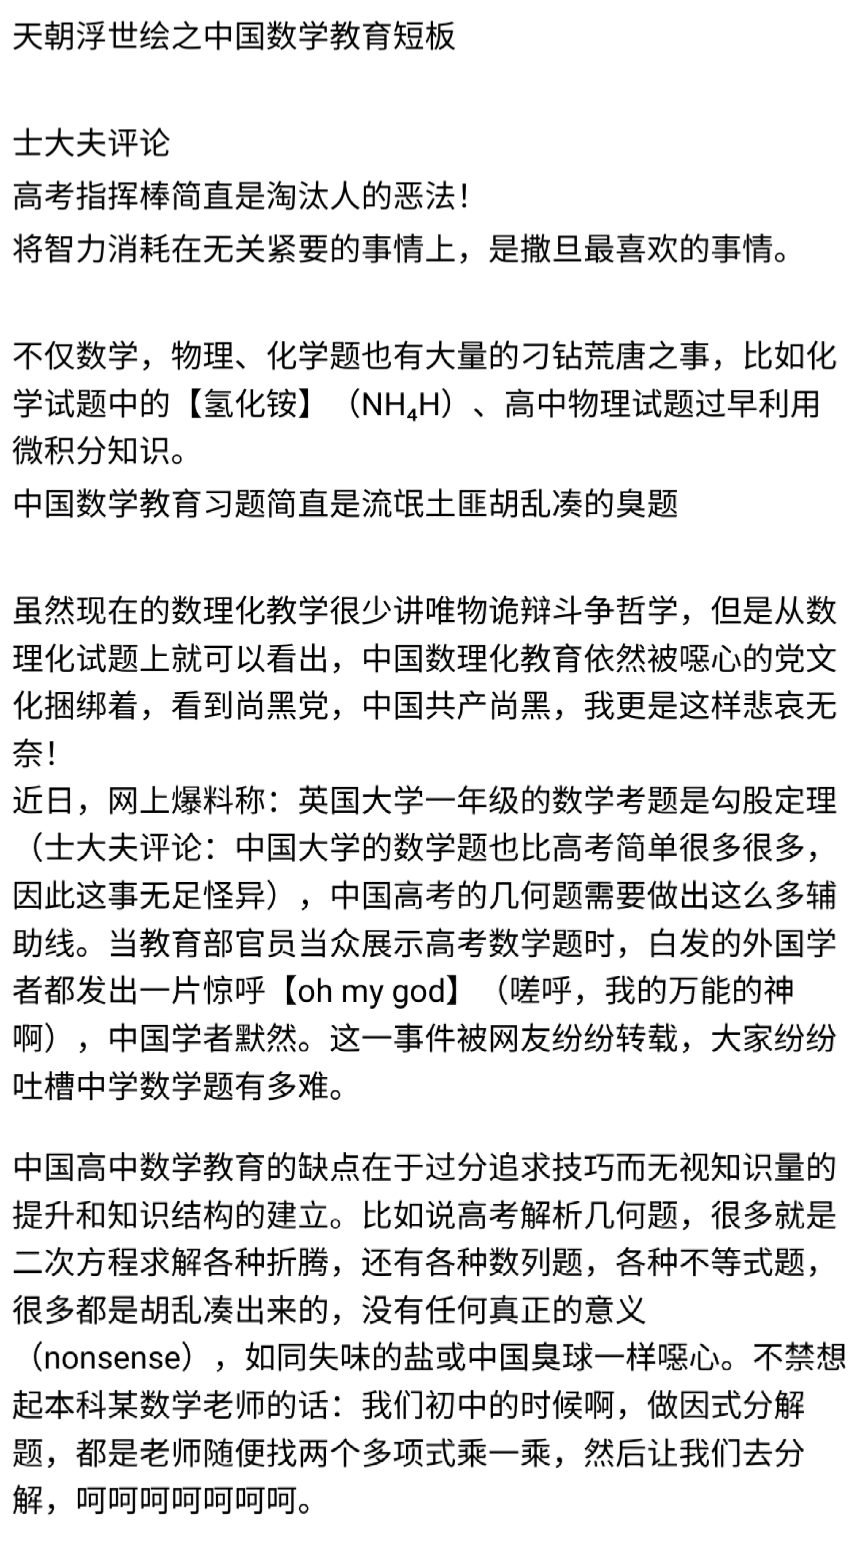 educational problems of Chinese CPC commie country by zumimvon on